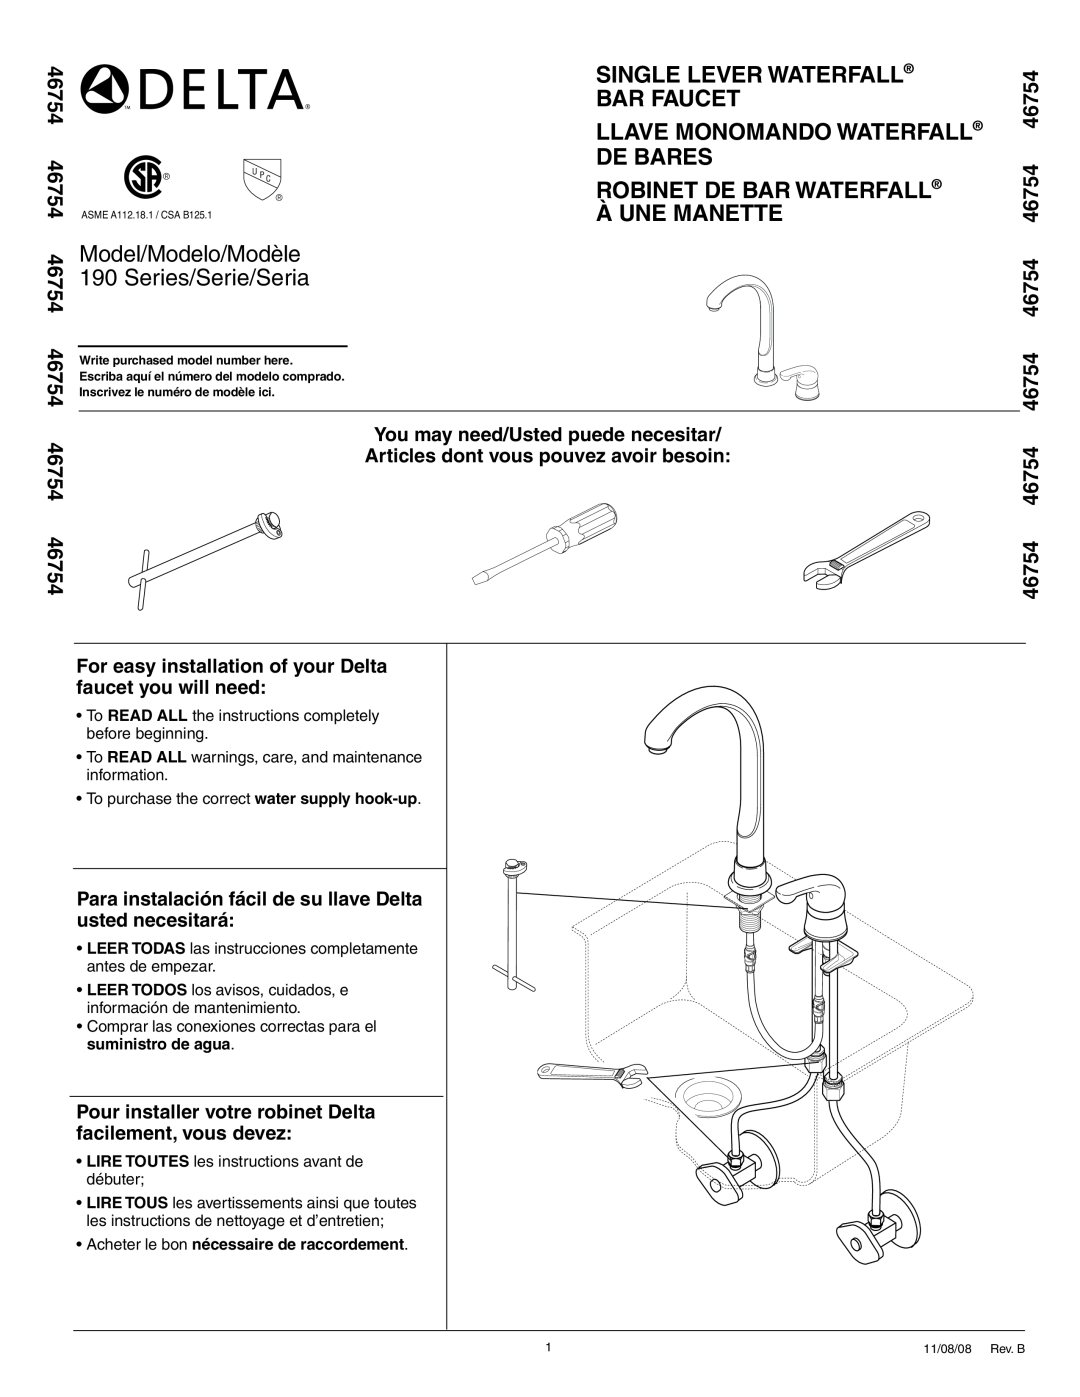 Delta RP6052 46754 46754 46754 46754 46754, To purchase the correct water supply hook-up, Single Lever Waterfall, De Bares 